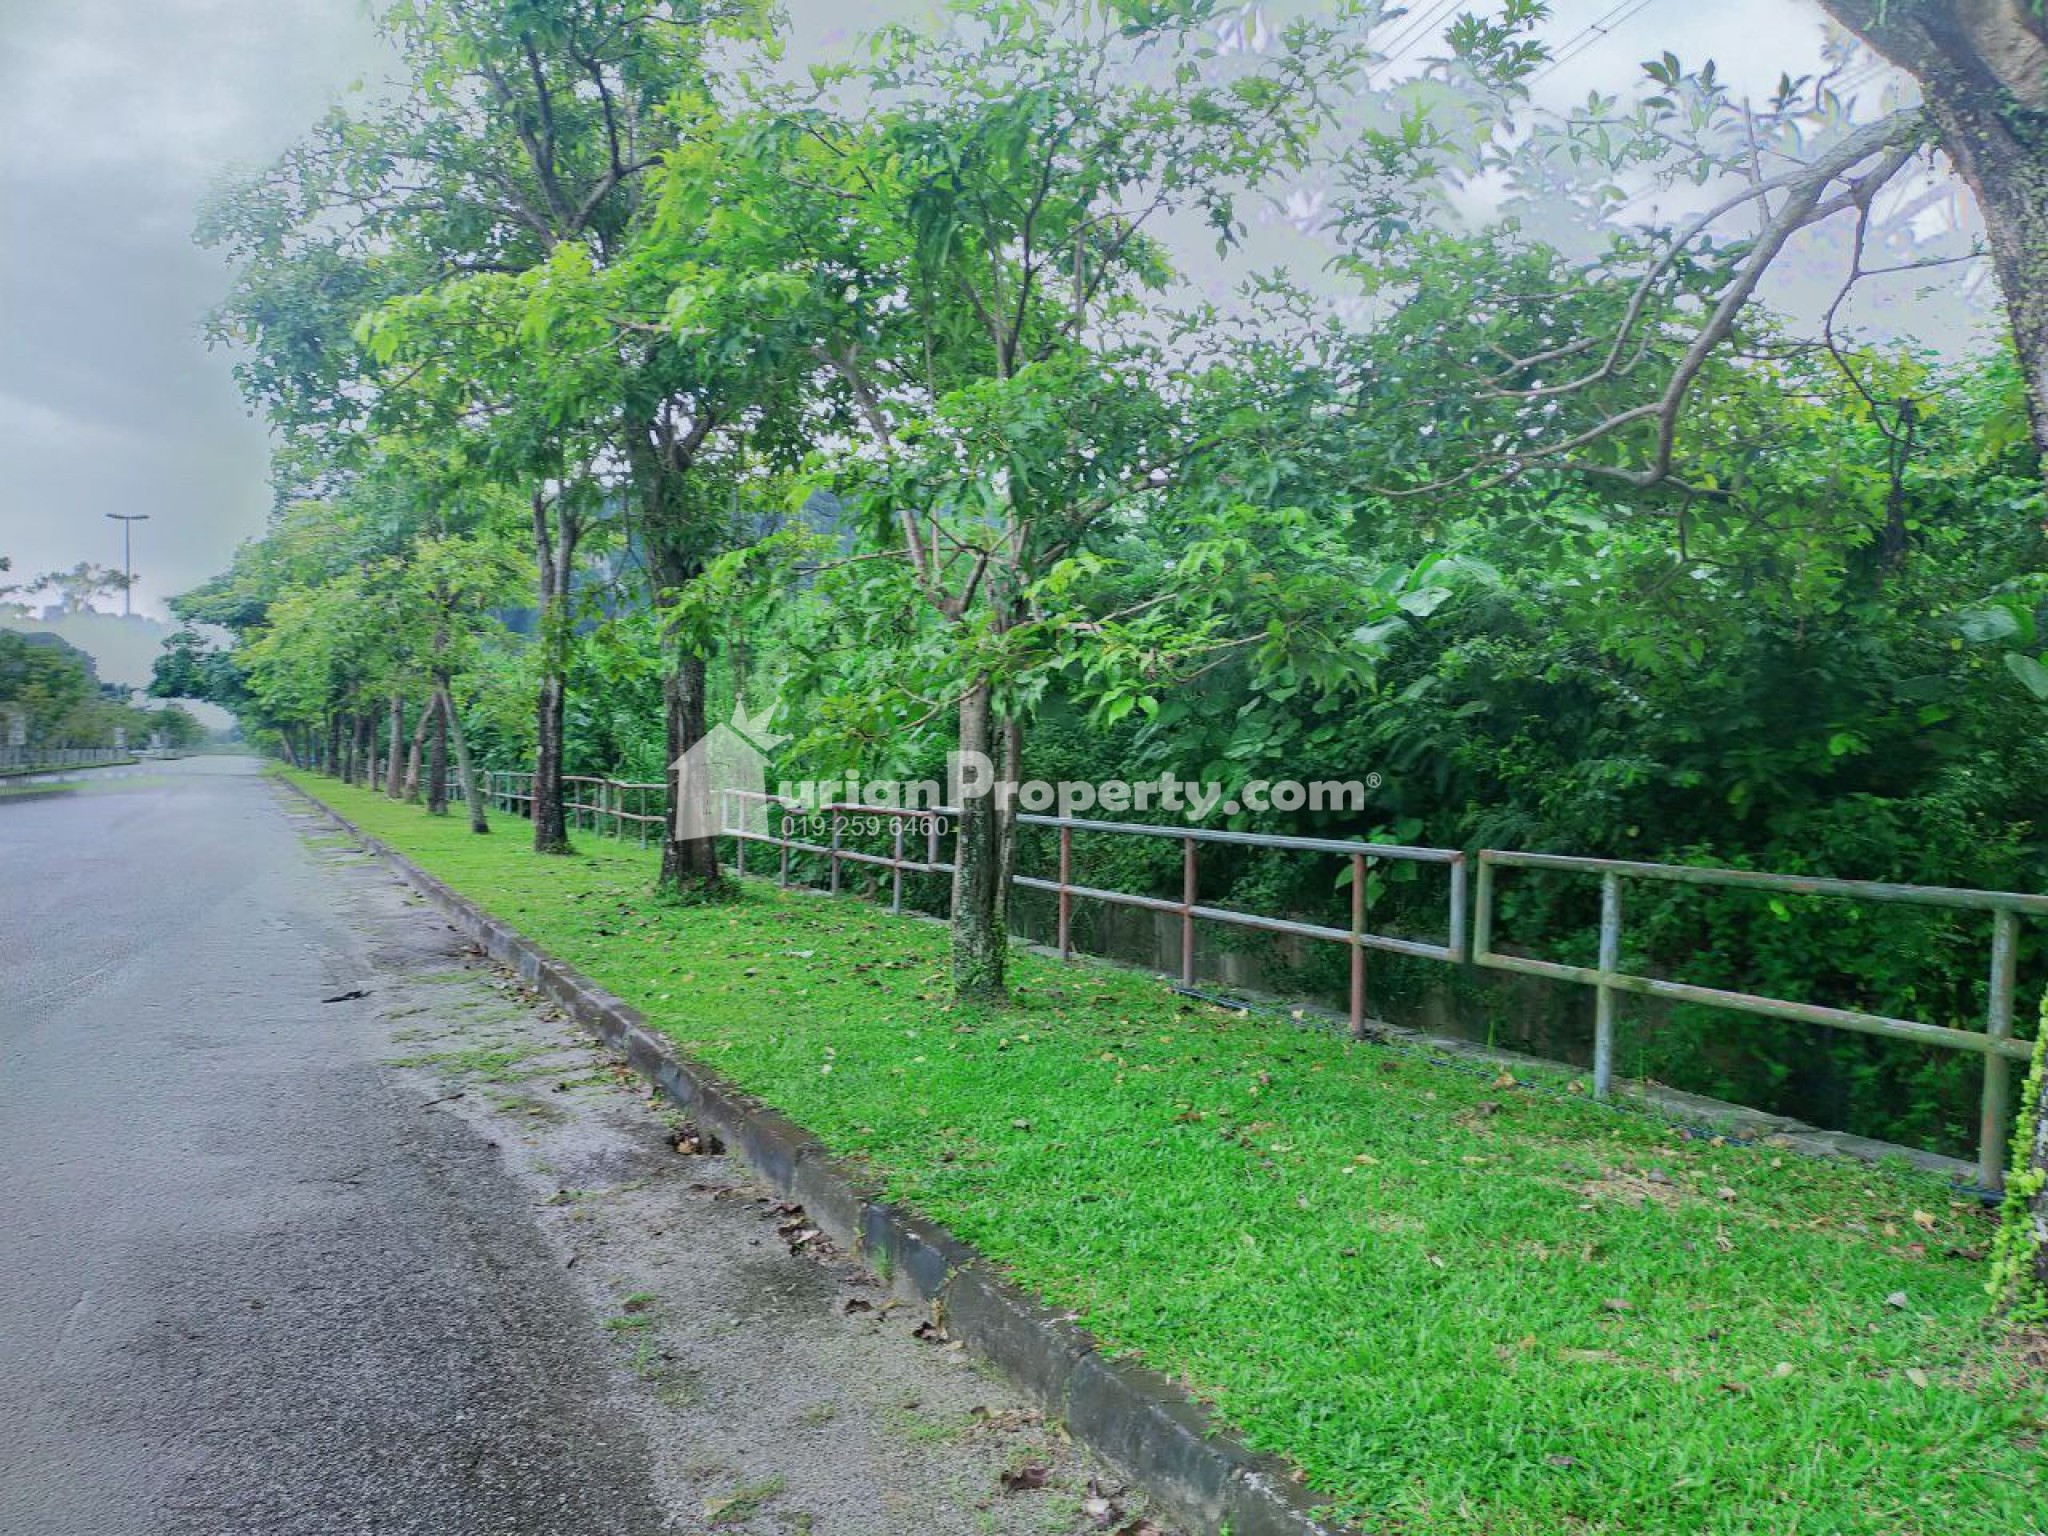 Agriculture Land For Sale at Ipoh